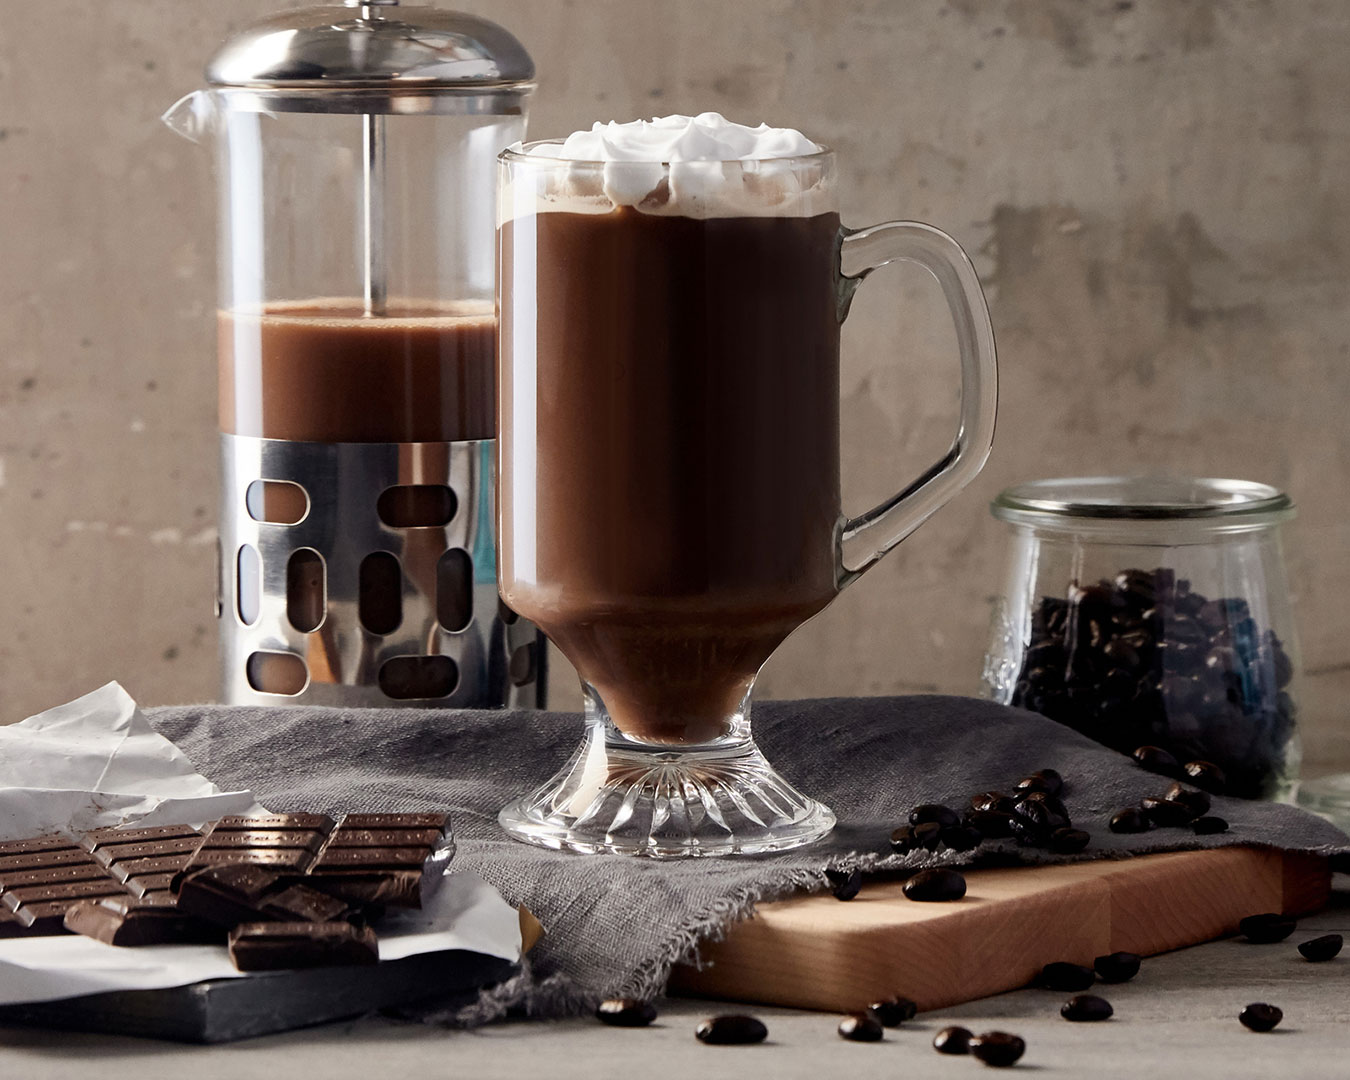 Mocha coffee with coffee press, coffee beans, and chocolate photographed by professional food and beverage photographer Kate Benson.